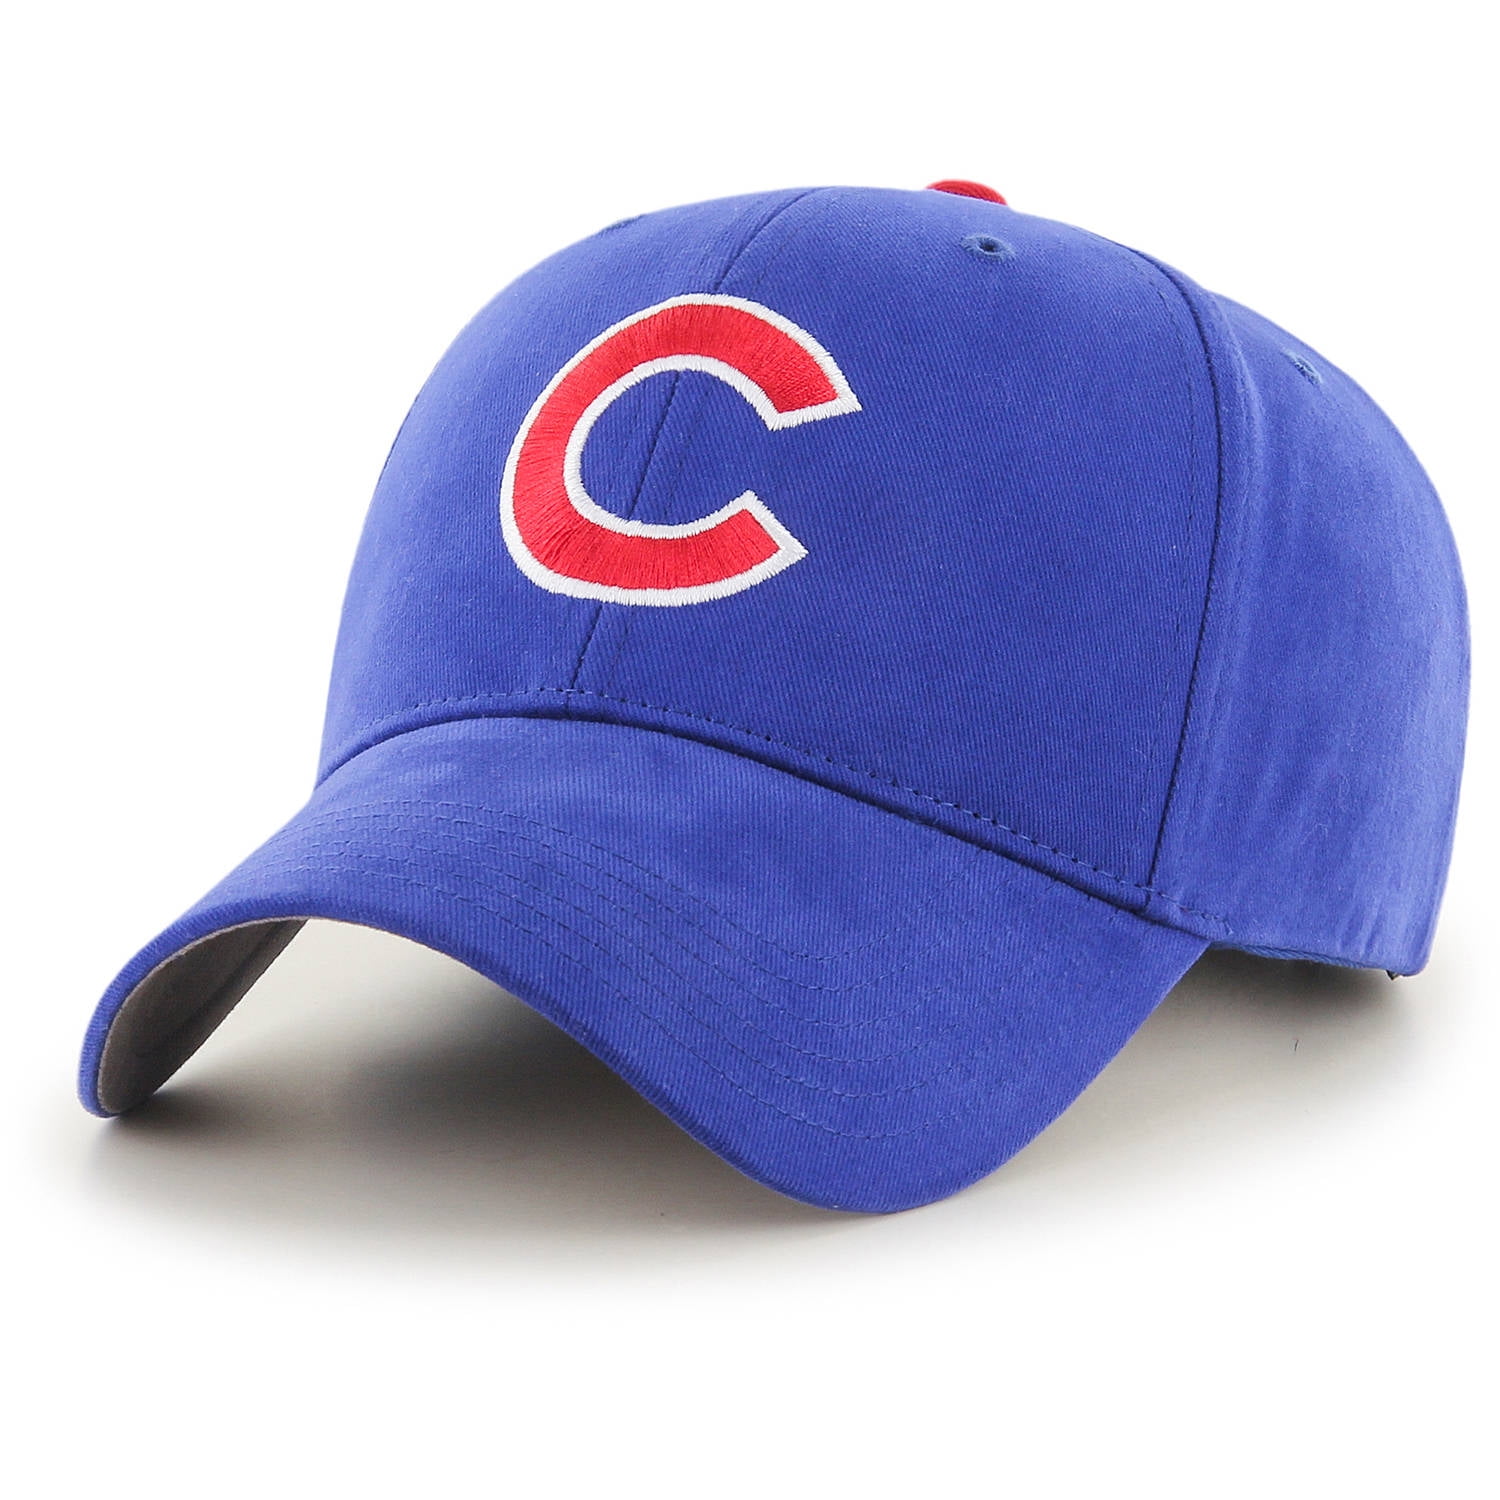 MLB Chicago Cubs Basic Youth Adjustable Cap/Hat by Fan Favorite ...